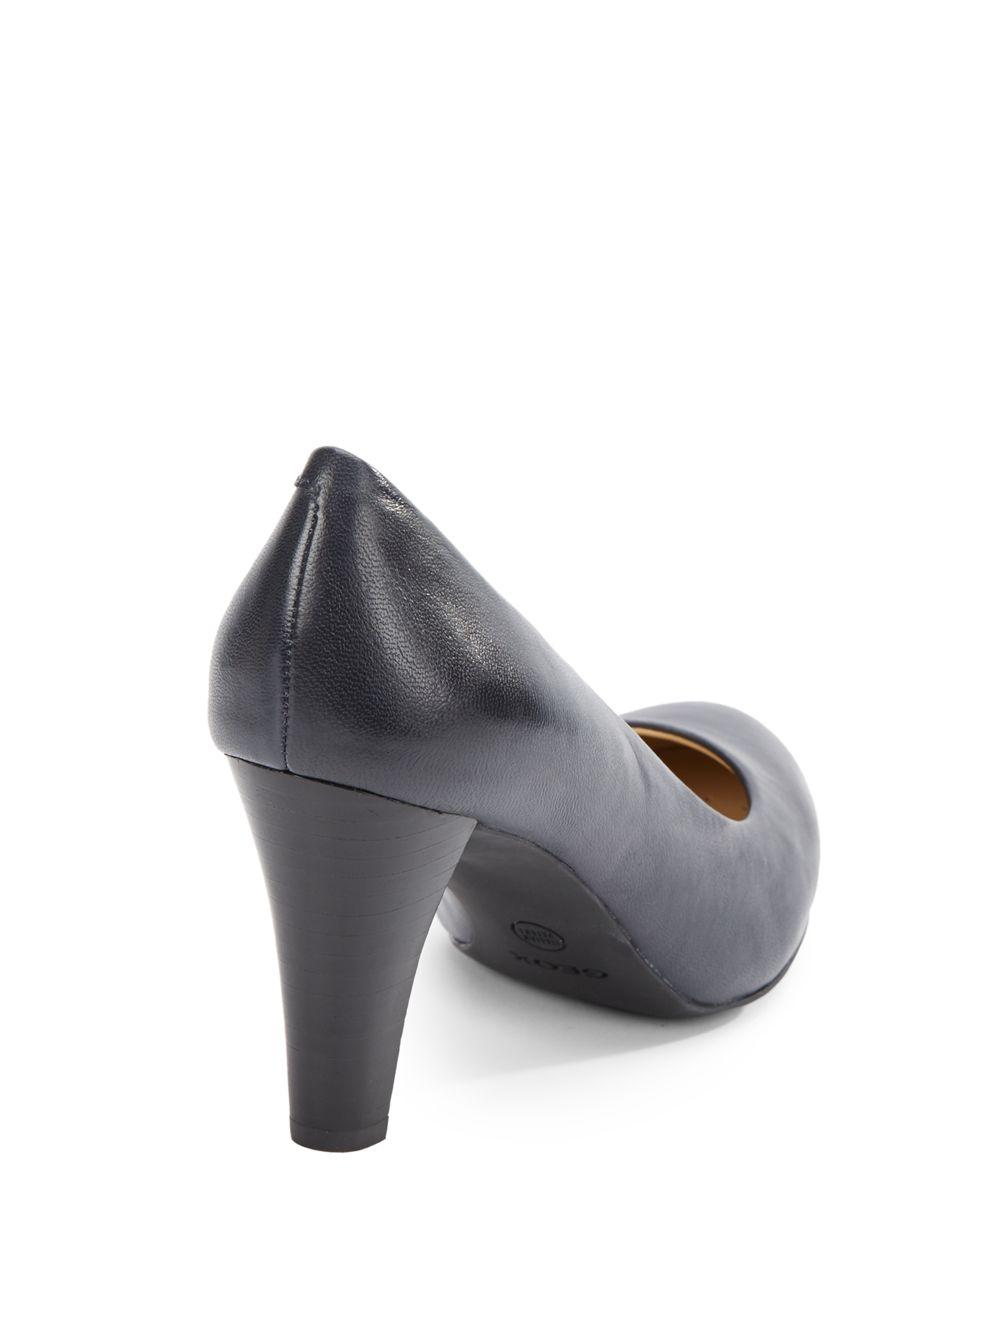 Geox Marie Claire Leather Pumps in Navy (Gray) - Lyst